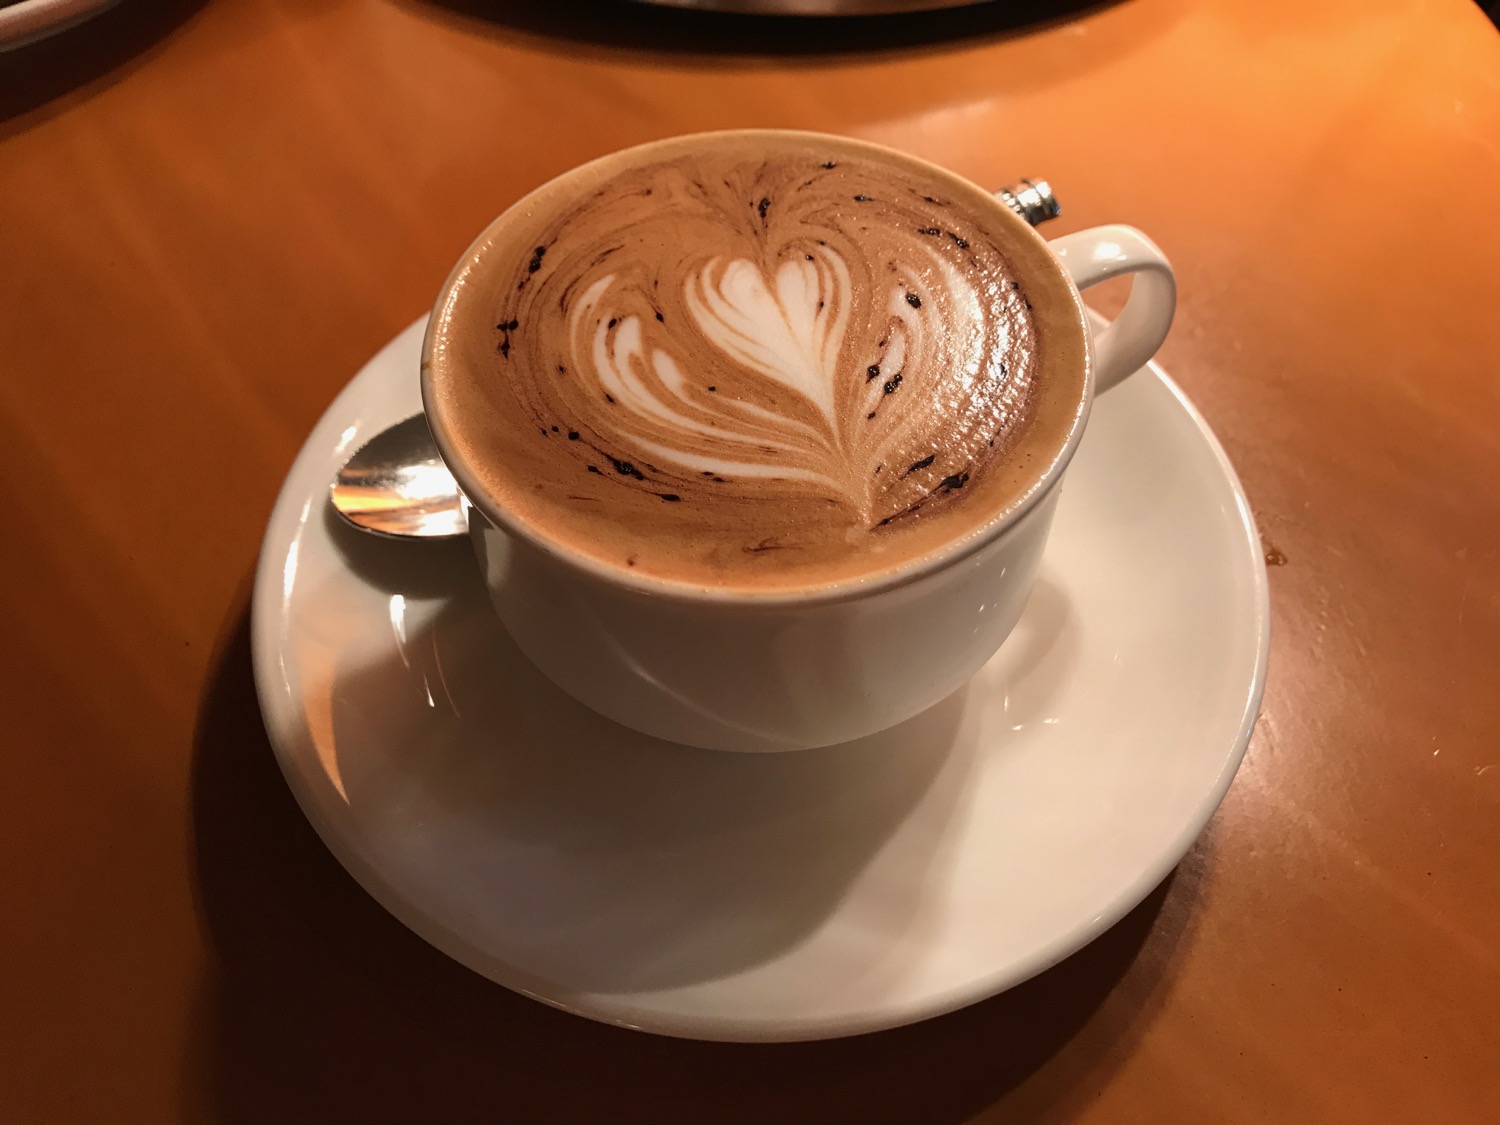 a cup of coffee with a heart design in the foam